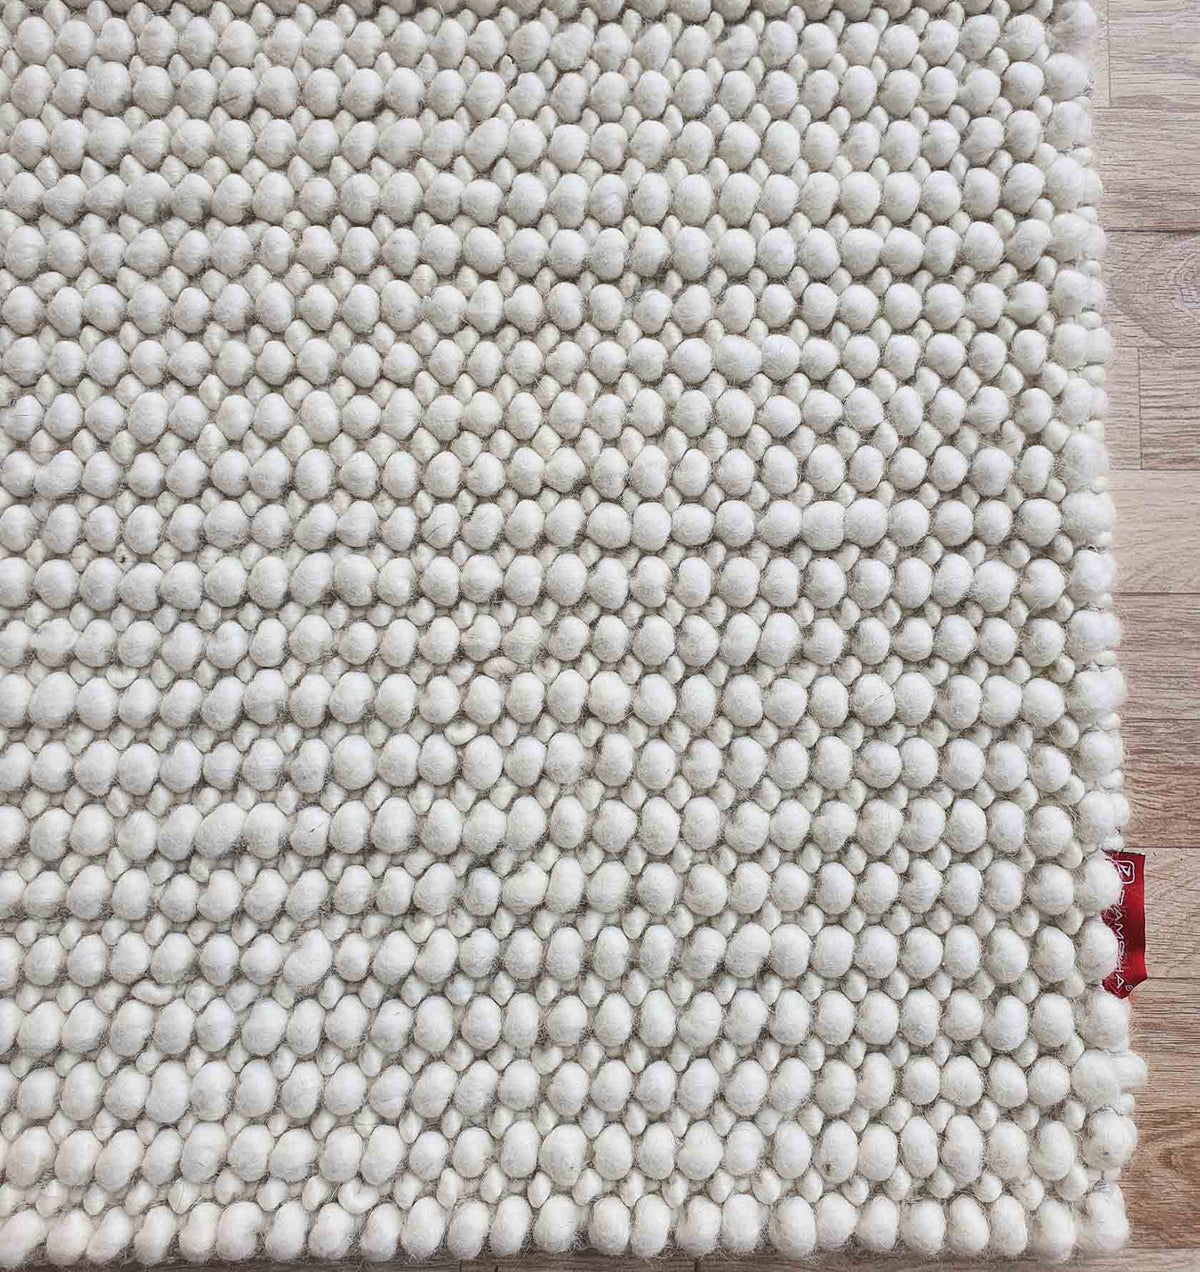 Hand Made Natural White Colour Woven Rug (5 Sizes)